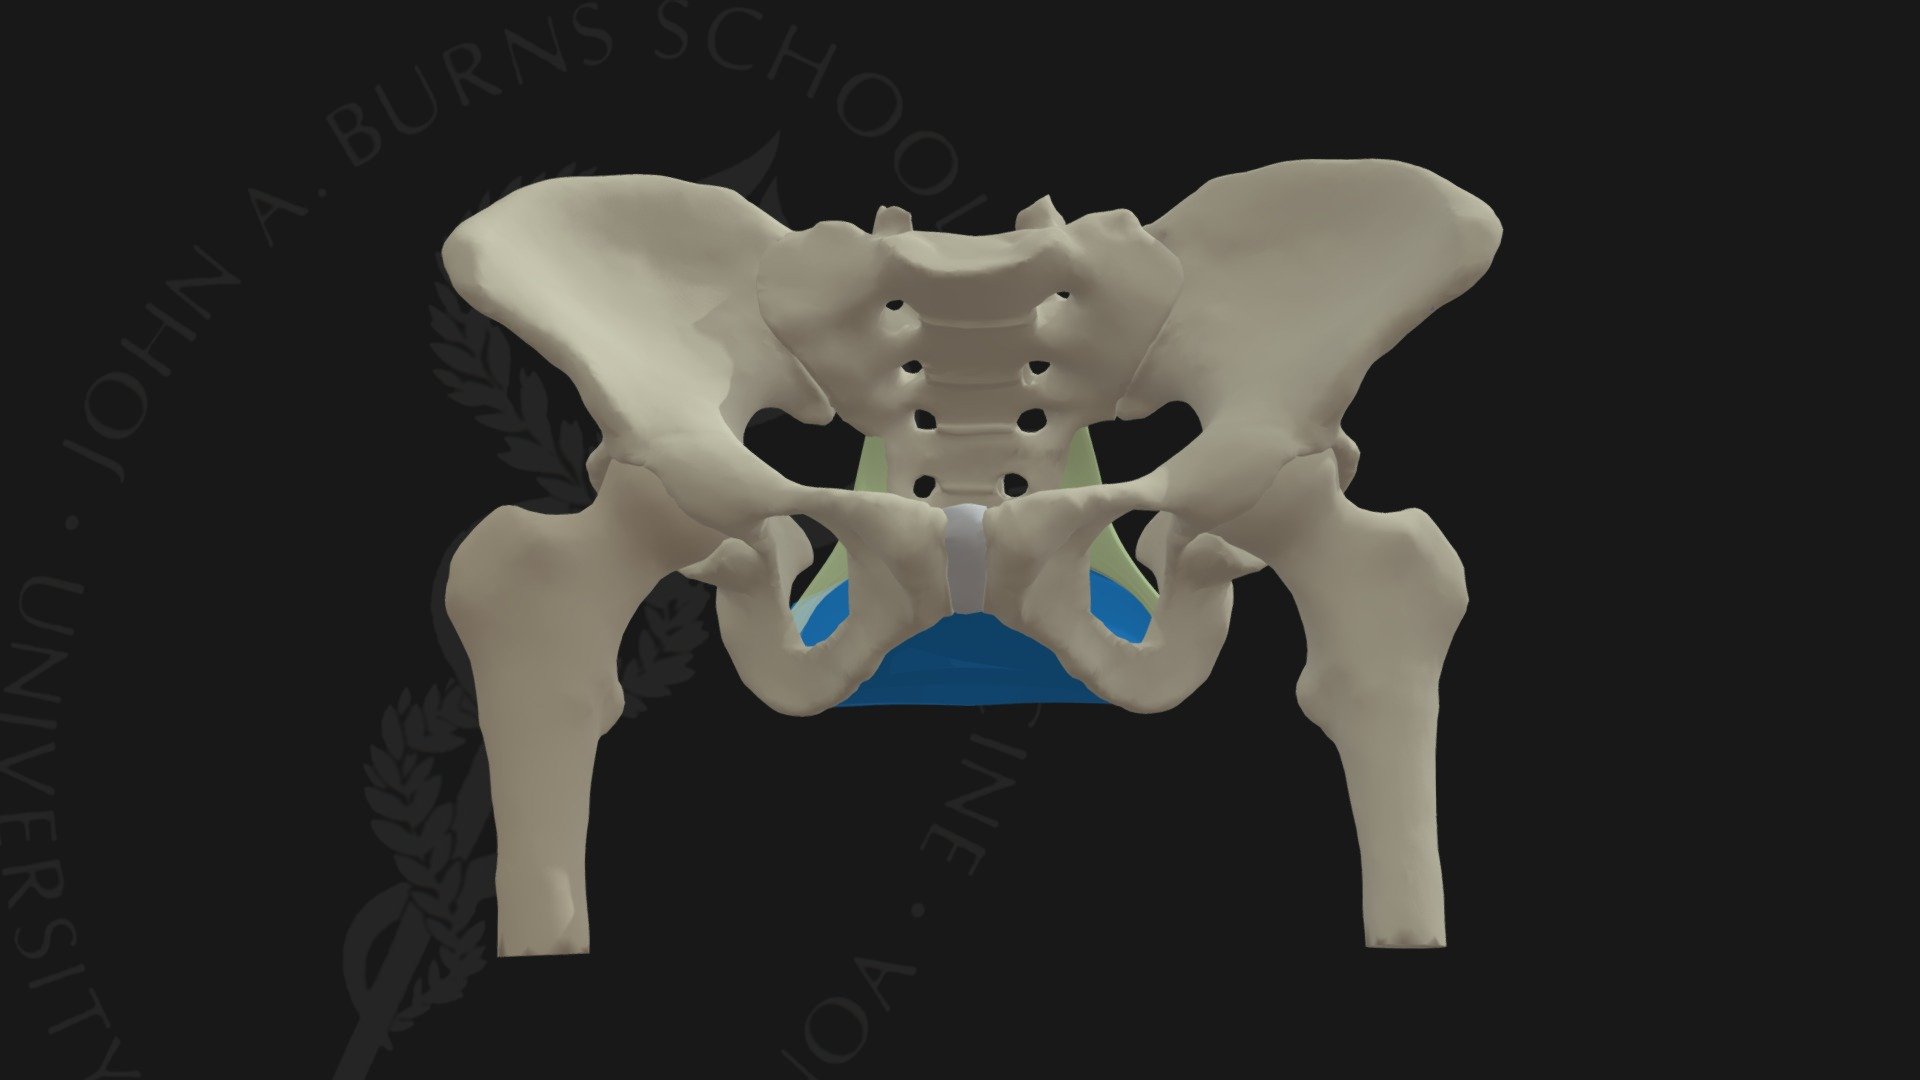 The perineum is defined as the entire pelvic outlet.  It is a roughly diamond shaped space formed be the pubis anteriorly, the ischial rami bilaterally, the ischial tuberosities and then posteriorly by the coccyx and bilaterally by the sacrotuberous ligaments.  By drawing a line between the ischial tuerosities bilaterally, the perineum is subdivided into an anteirorly placed urogenital triangle and a posteriorly positioned anal triangle.  The urogenital triangle is subdivided into a deep pouch that contains the urogenital diaphragm with its conspicuous inferior fasica called the perineal membrane and the superficial pouch including the erectile tissues and associated muscles as well as the urethra, glands, and lower portion of the vagina in the female 3d model